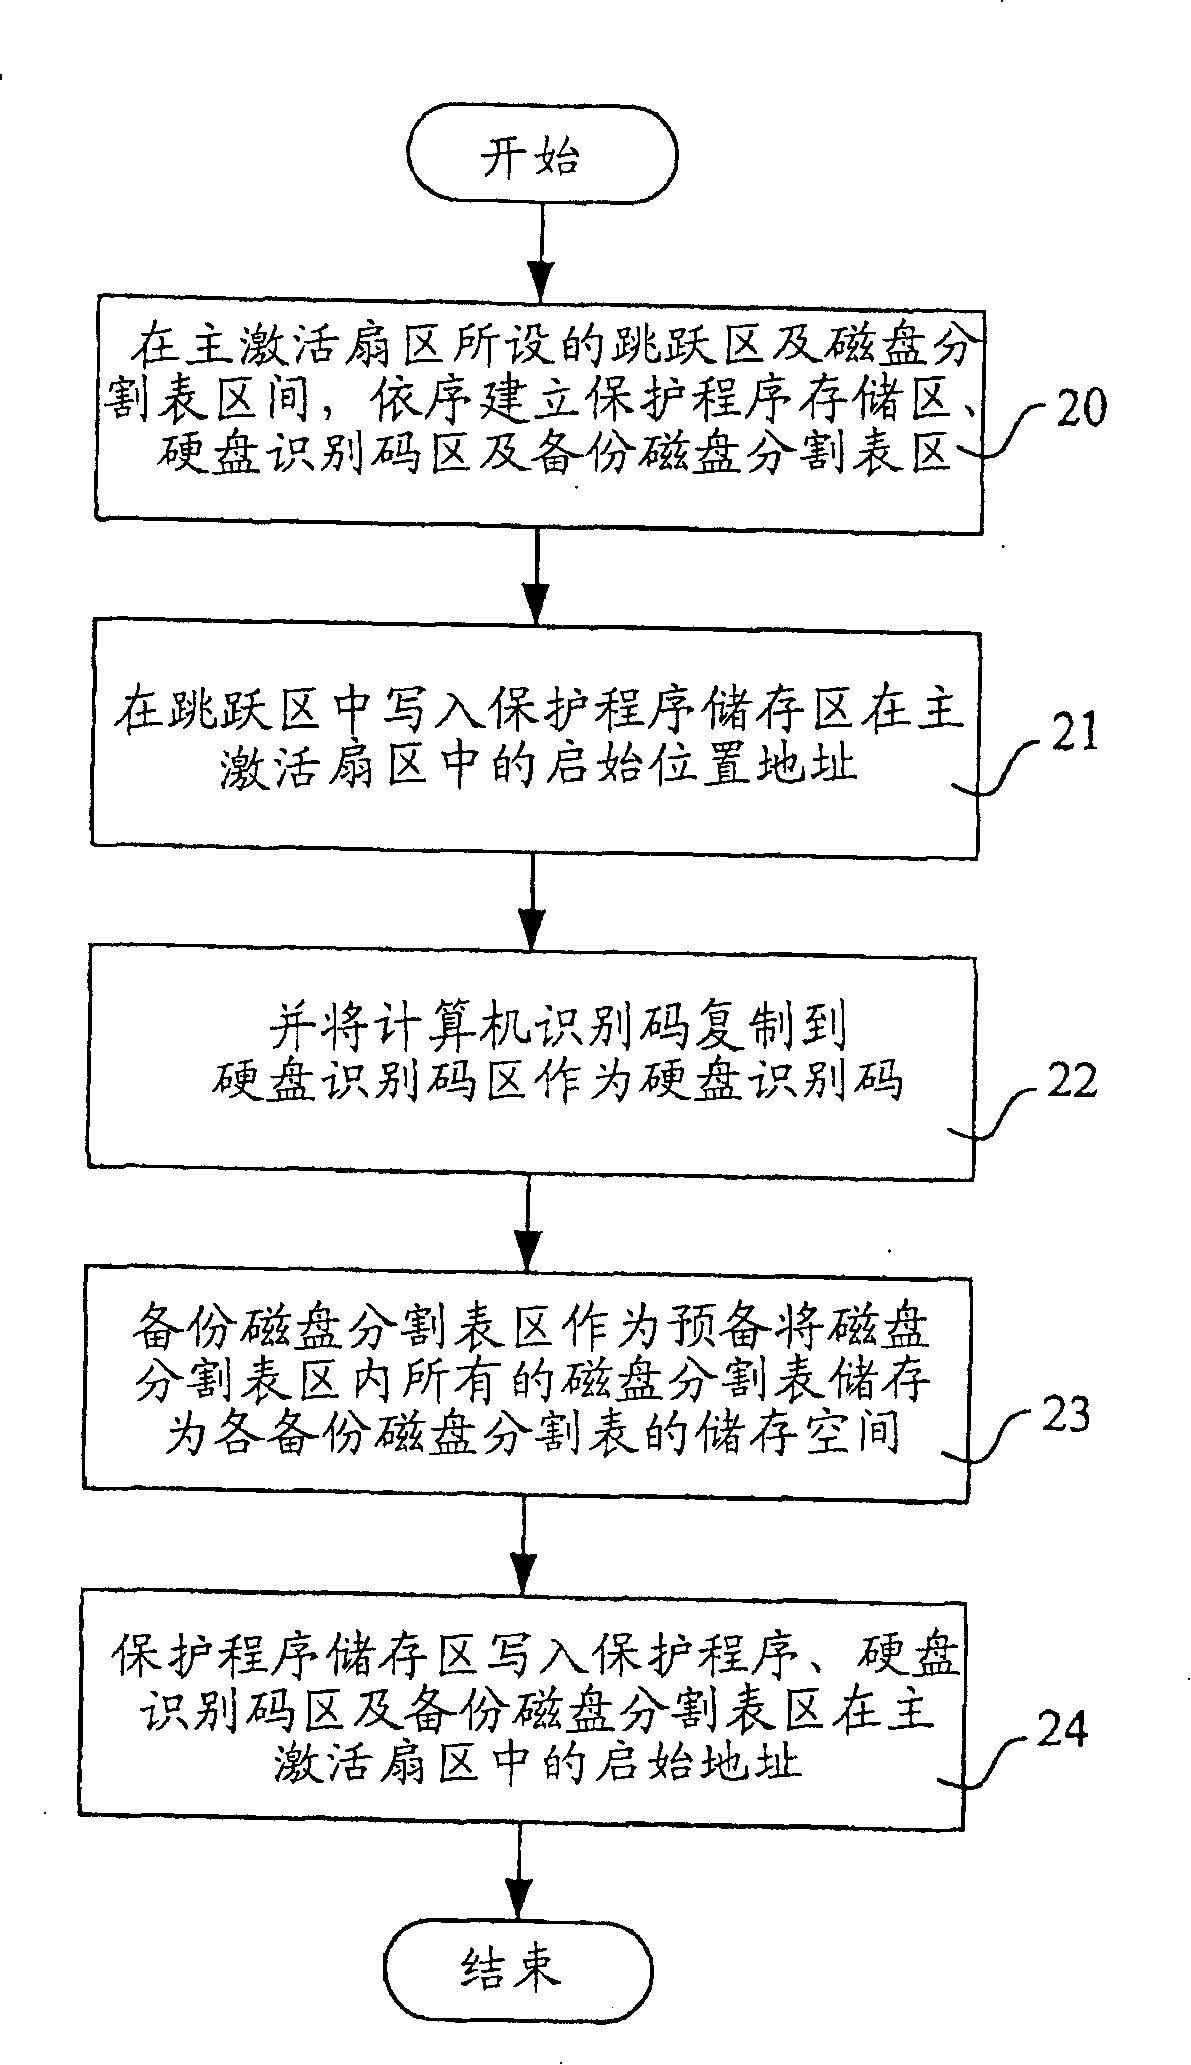 Method for protecting data of hard disk